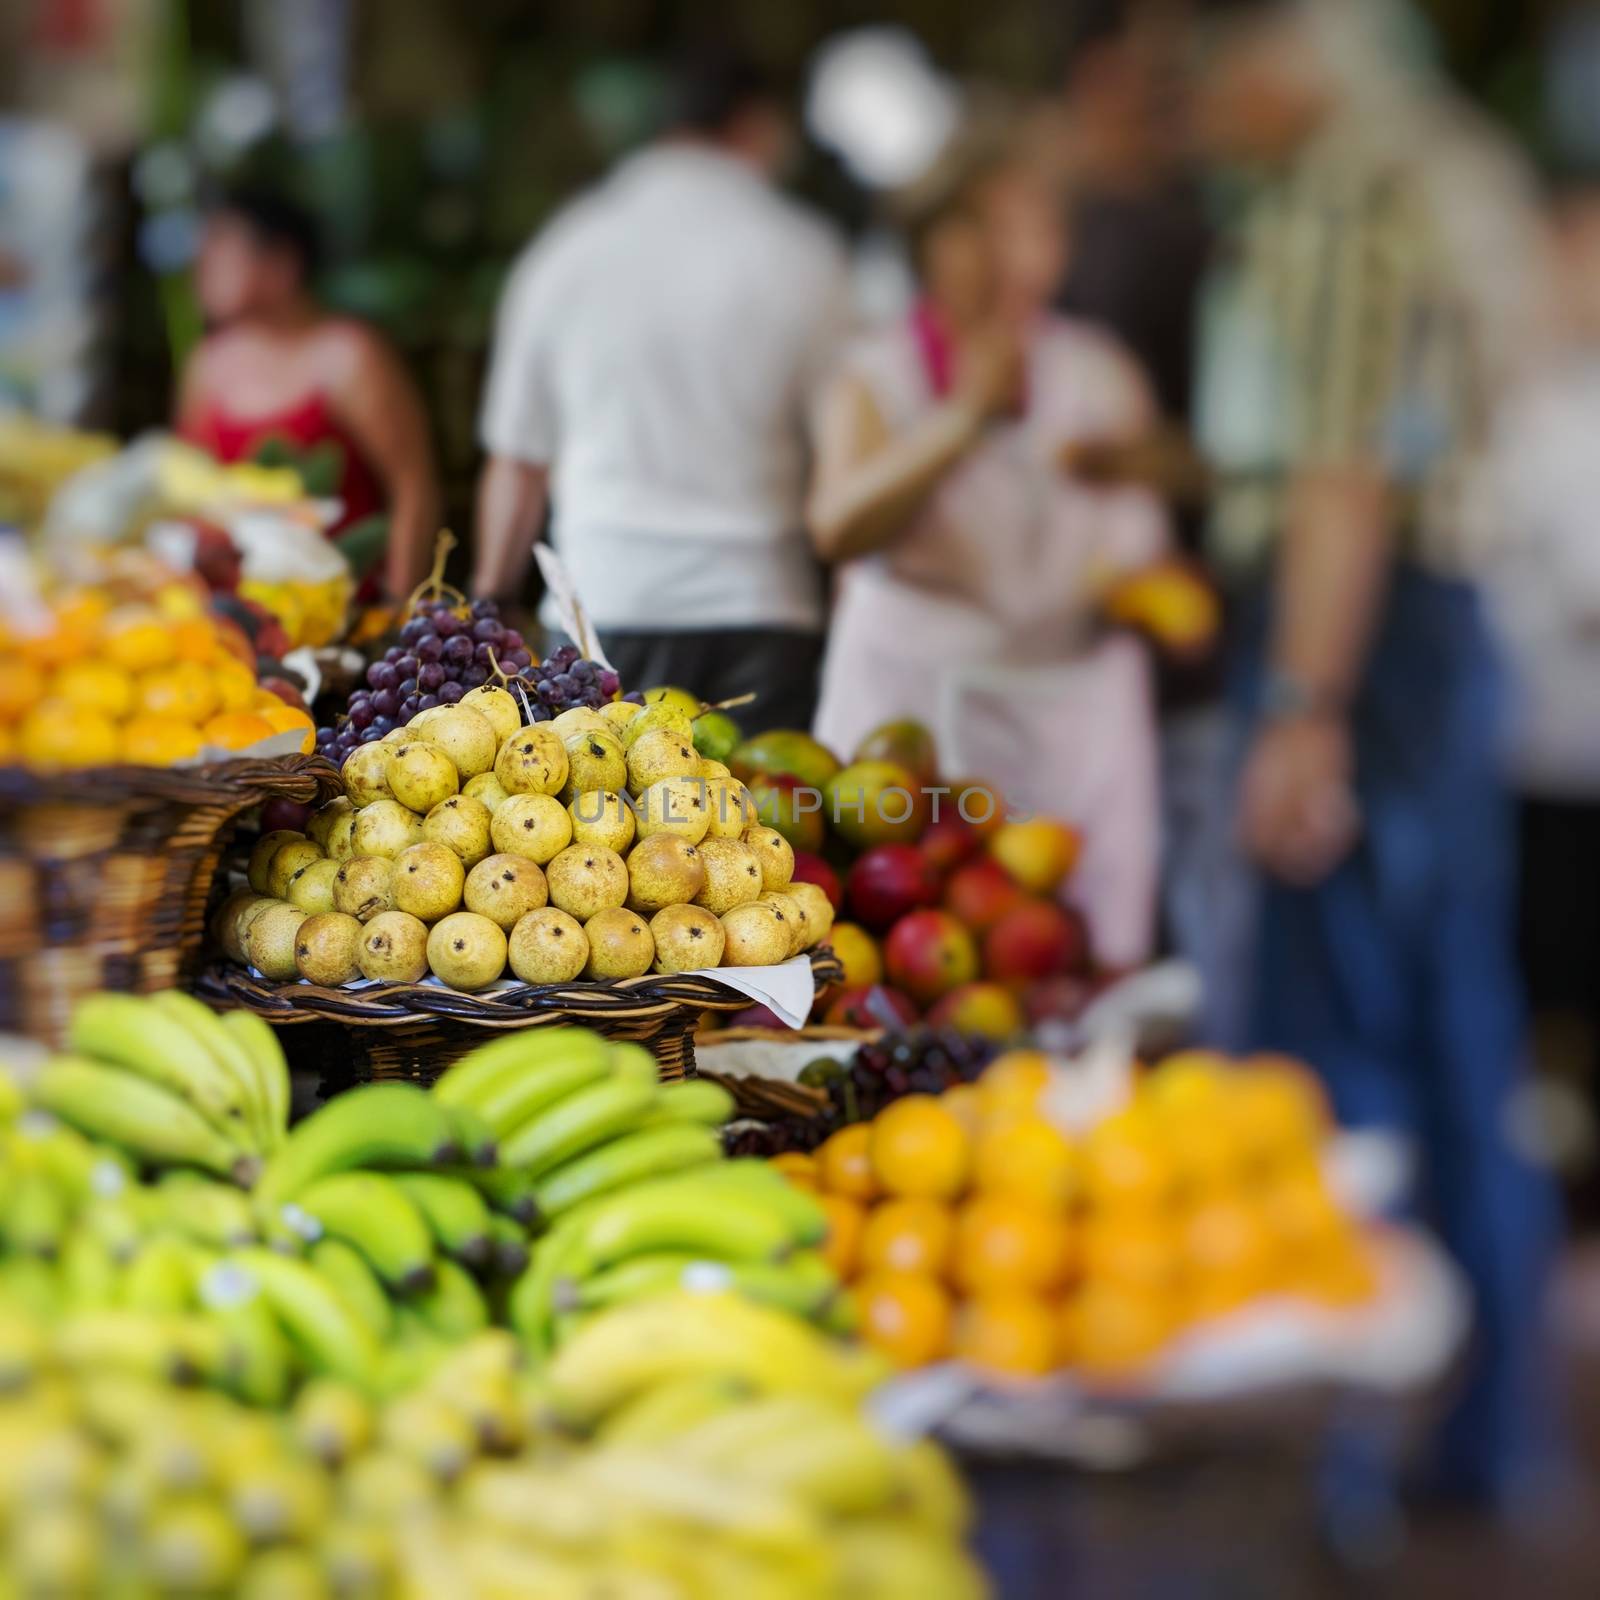 FUNCHAL, PORTUGAL - JUNE 25: Fresh exotic fruits in Mercado Dos Lavradores.on June 25, 2015 in Madeira Island, Portugal.

